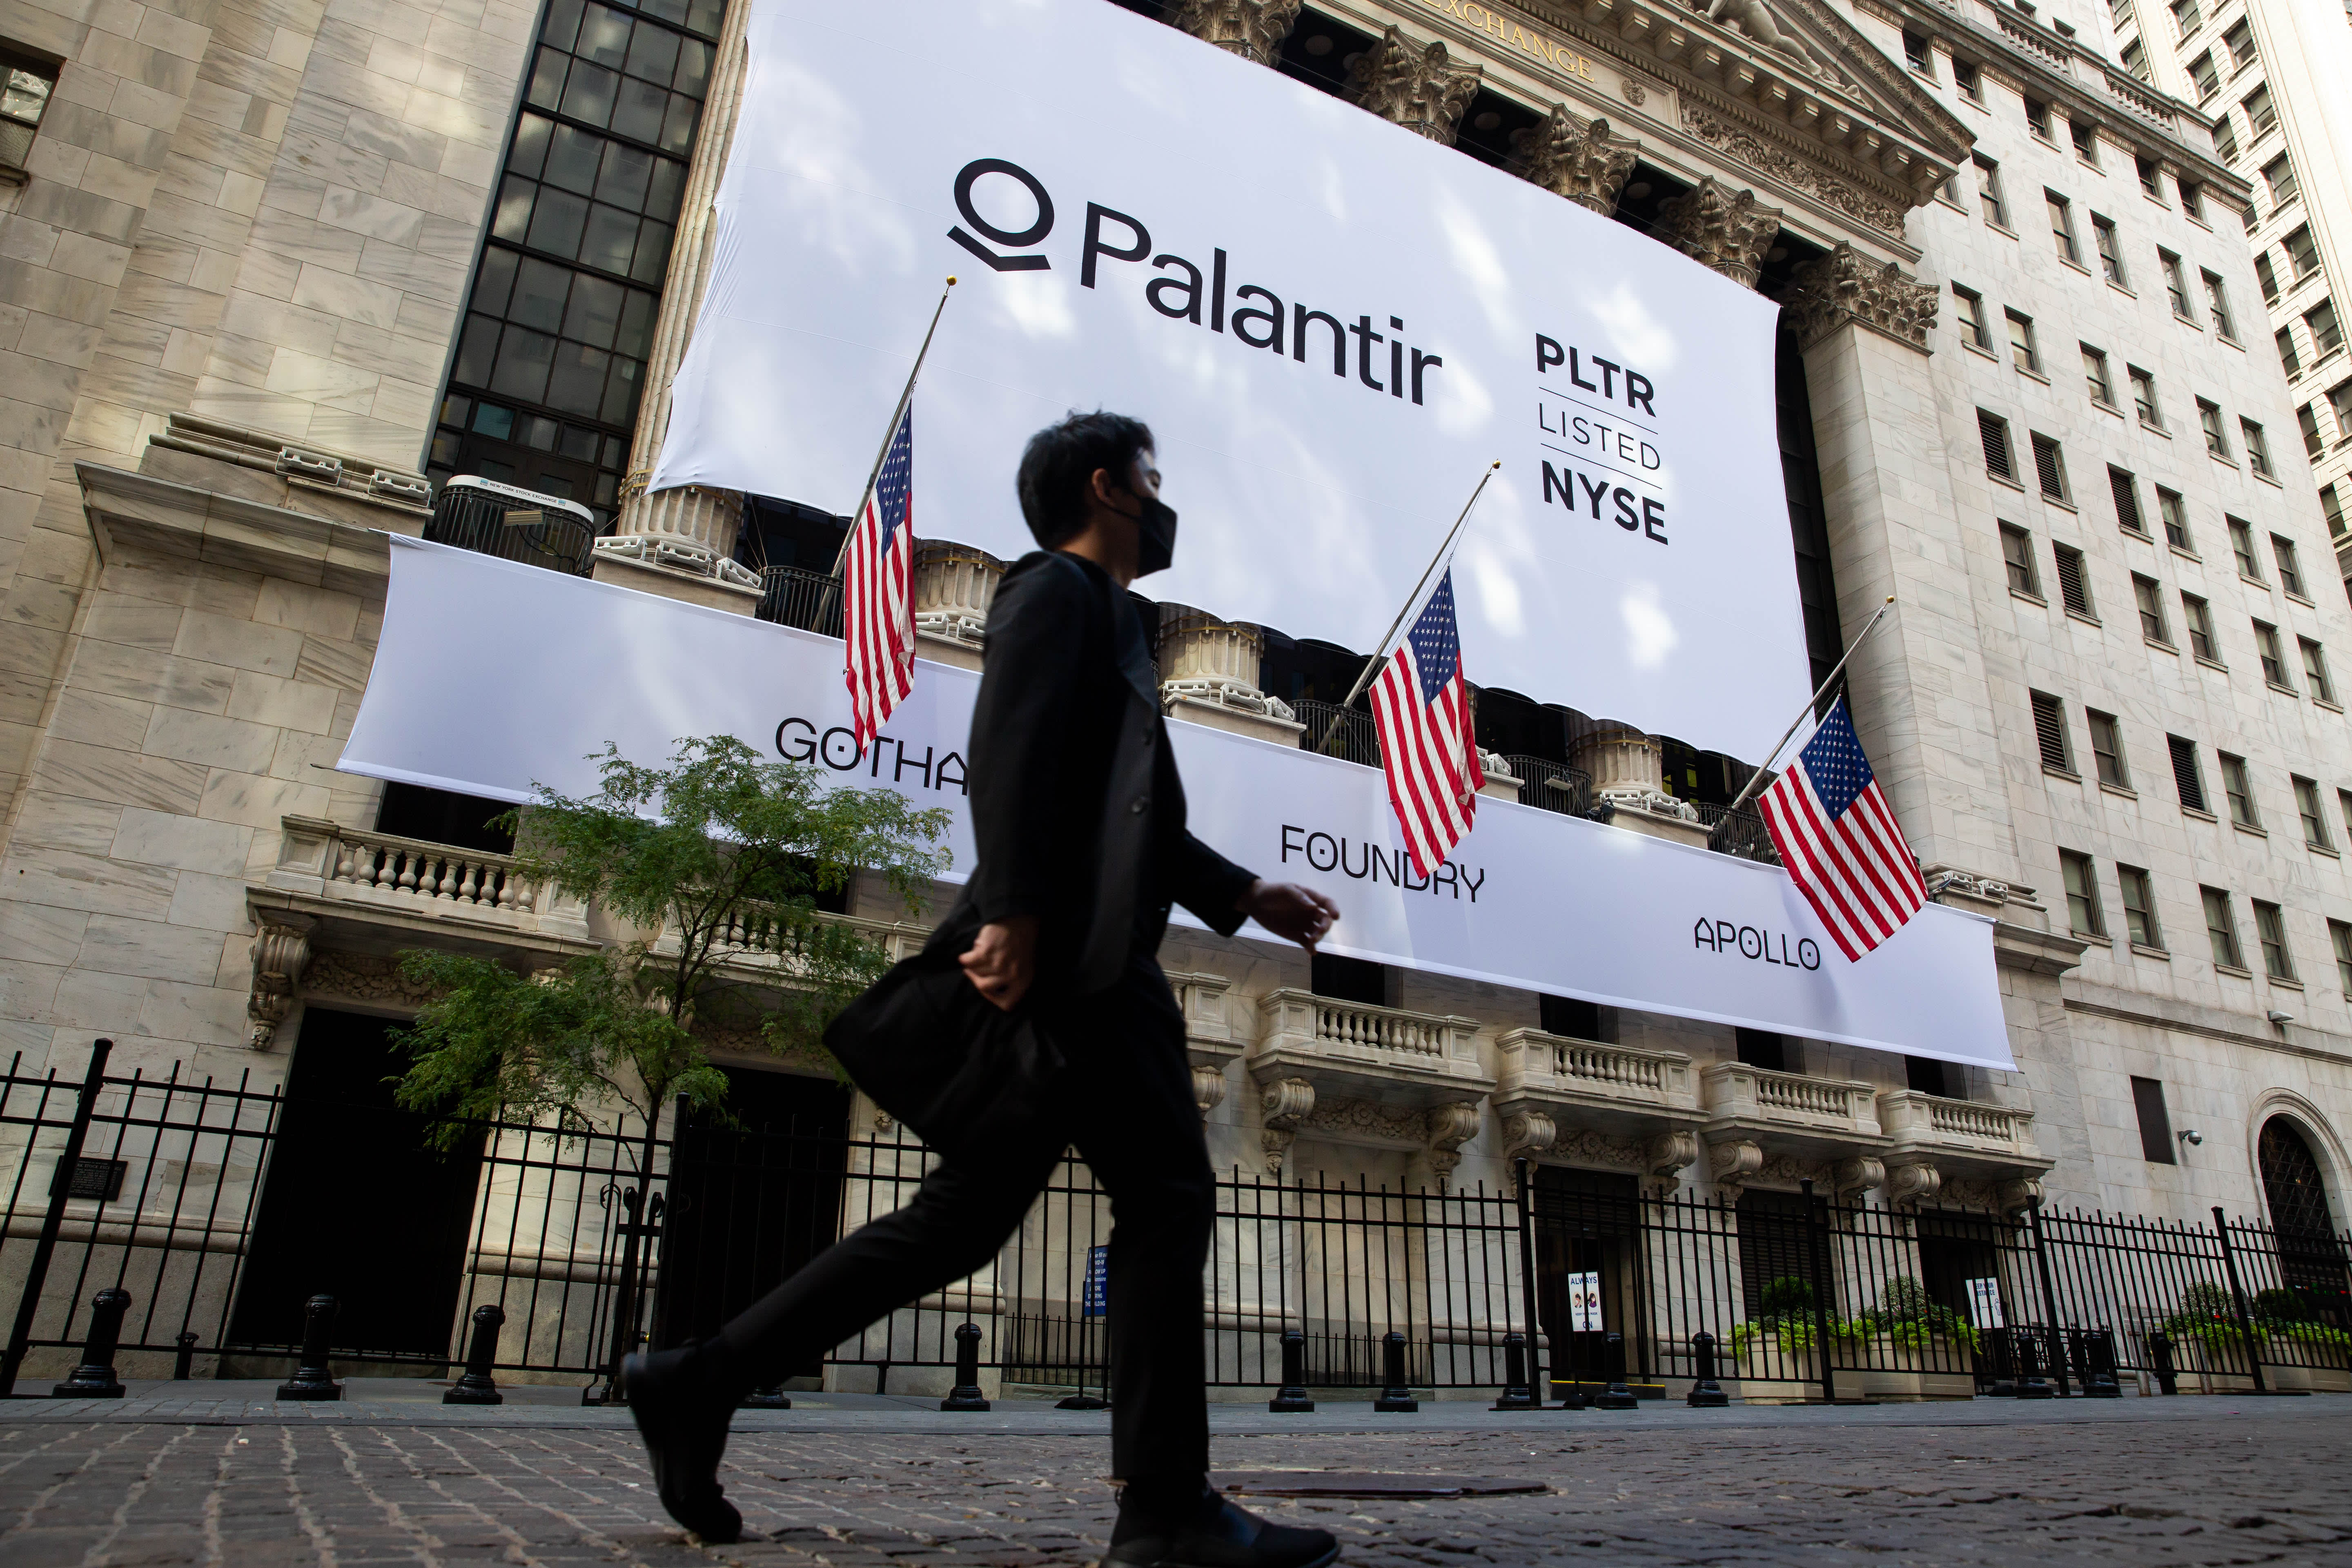 Last year at this time, Palantir was gearing up for its long-awaited stock market debut. Now, the data analytics software developer has emerged as a m